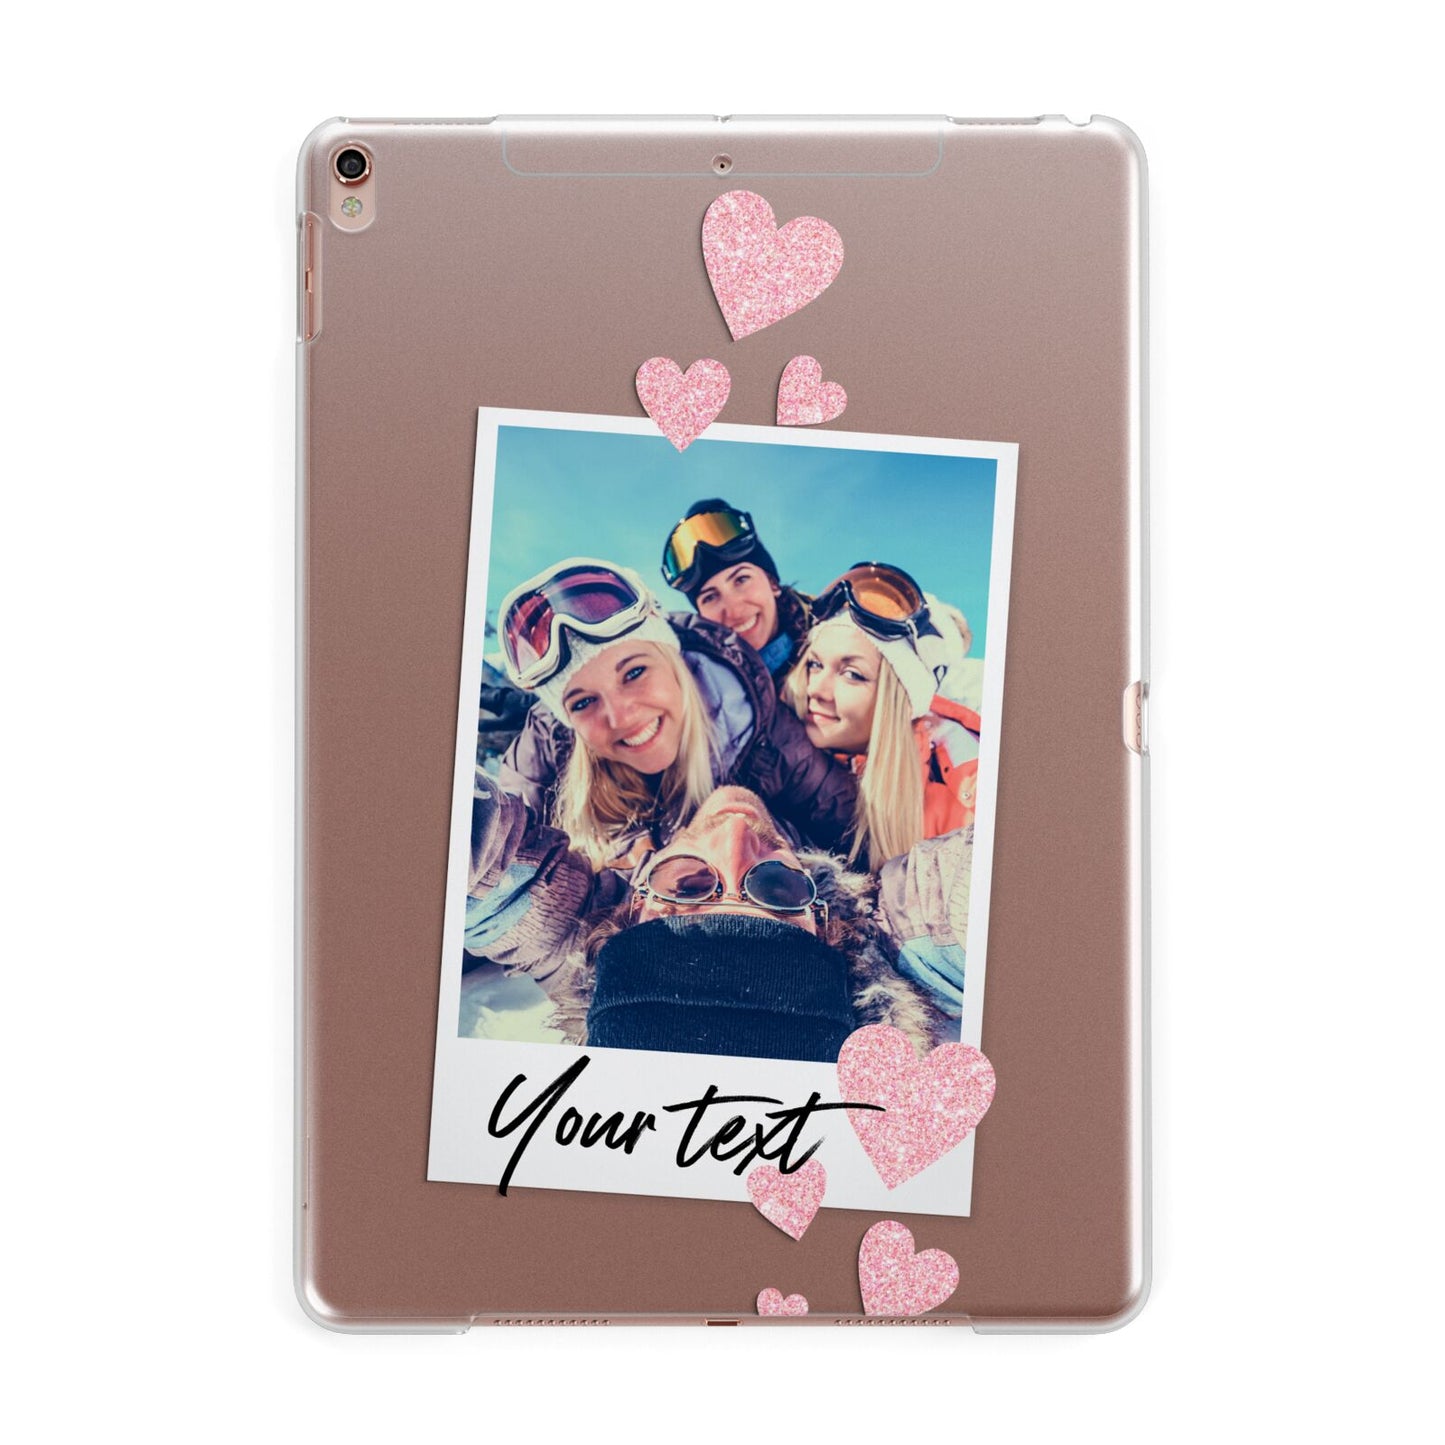 Photo with Text Apple iPad Rose Gold Case